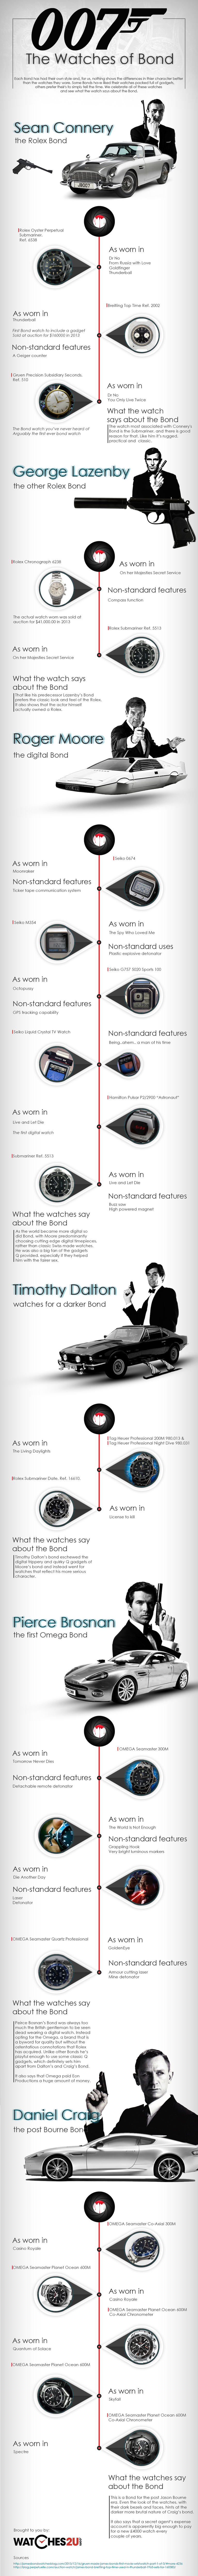 The Watches Of Bond